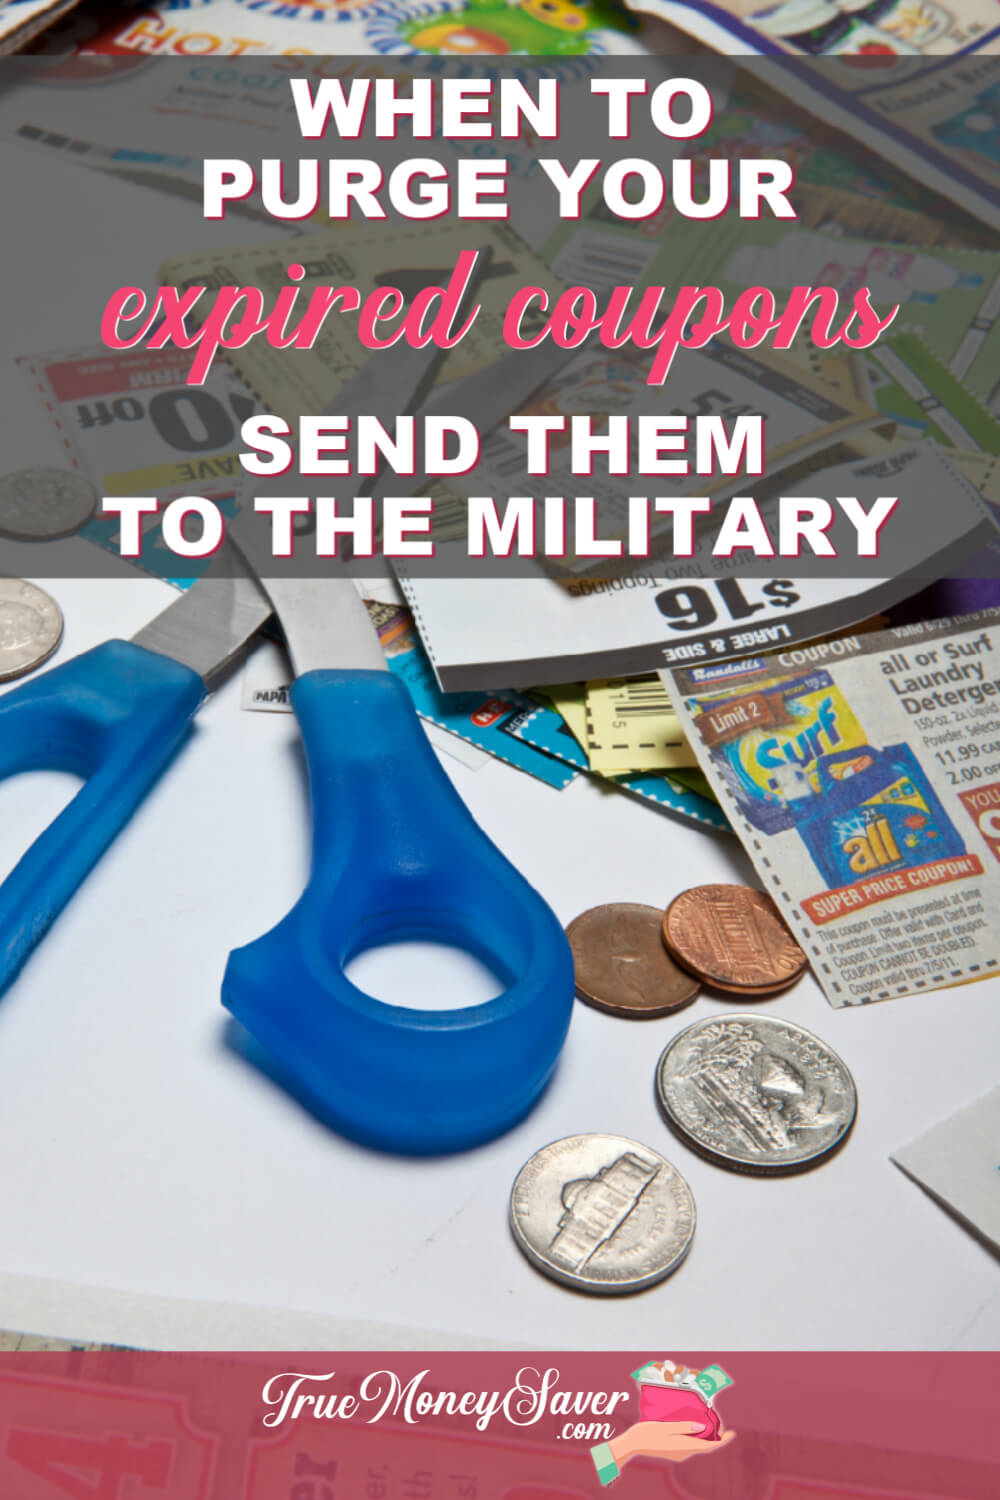 Expired Coupon List To Keep Your Coupon Box Clean & Up-To-Date!